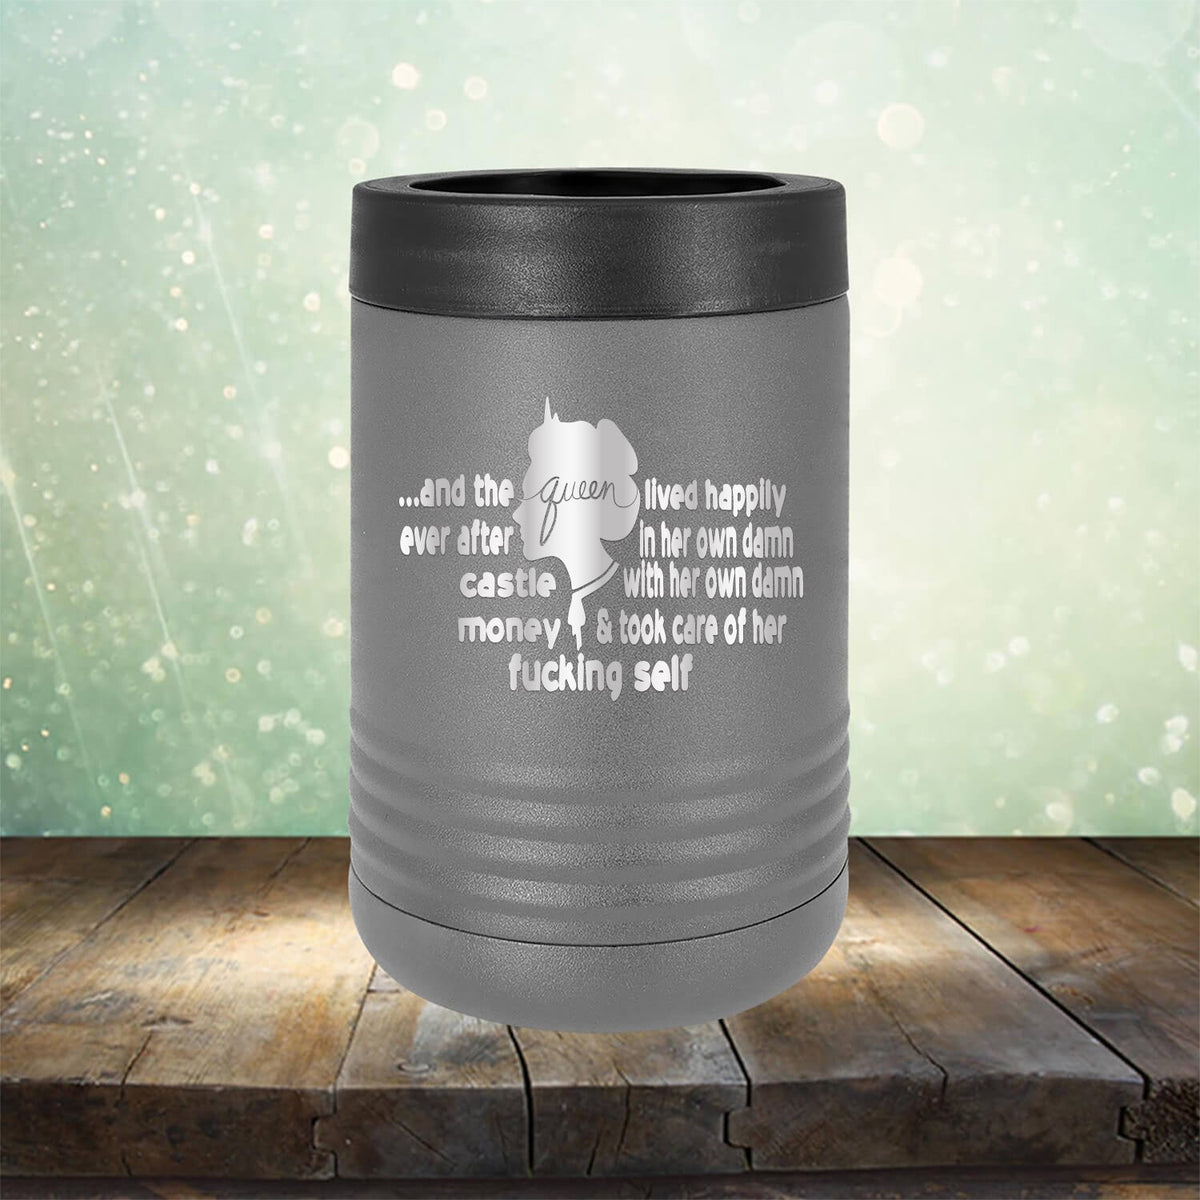 And The Queen Lived Happily After Ever In Her Own Damn Castle With Her Own Damn Money &amp; Took Care of Her Fucking Self - Laser Etched Tumbler Mug